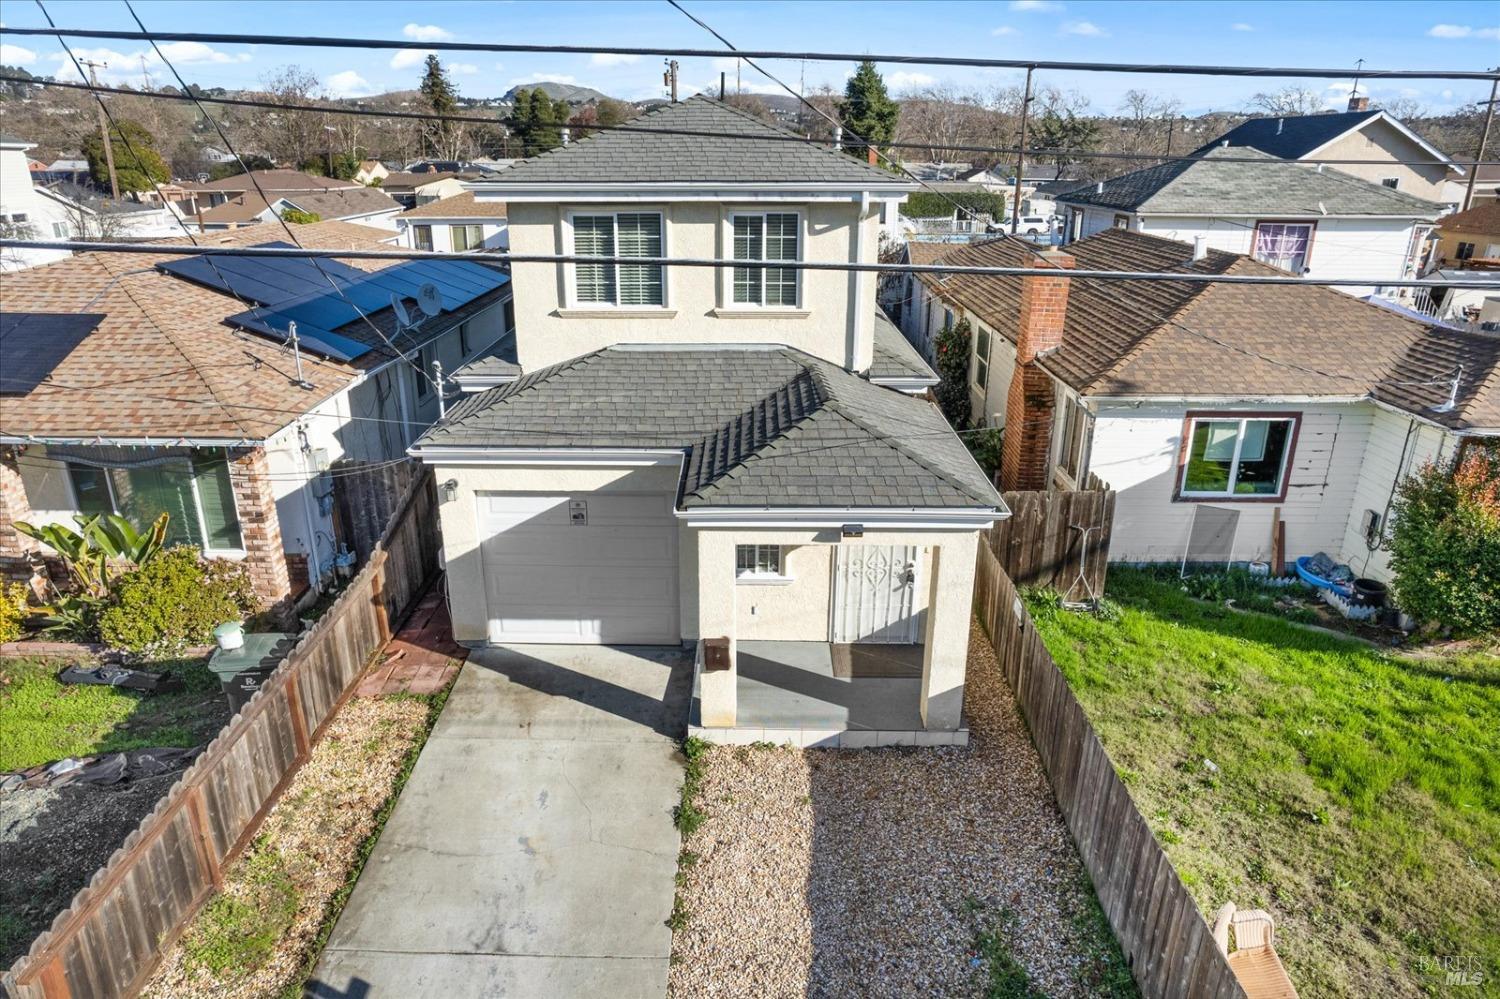 Photo of 526 Warford Ave in Vallejo, CA